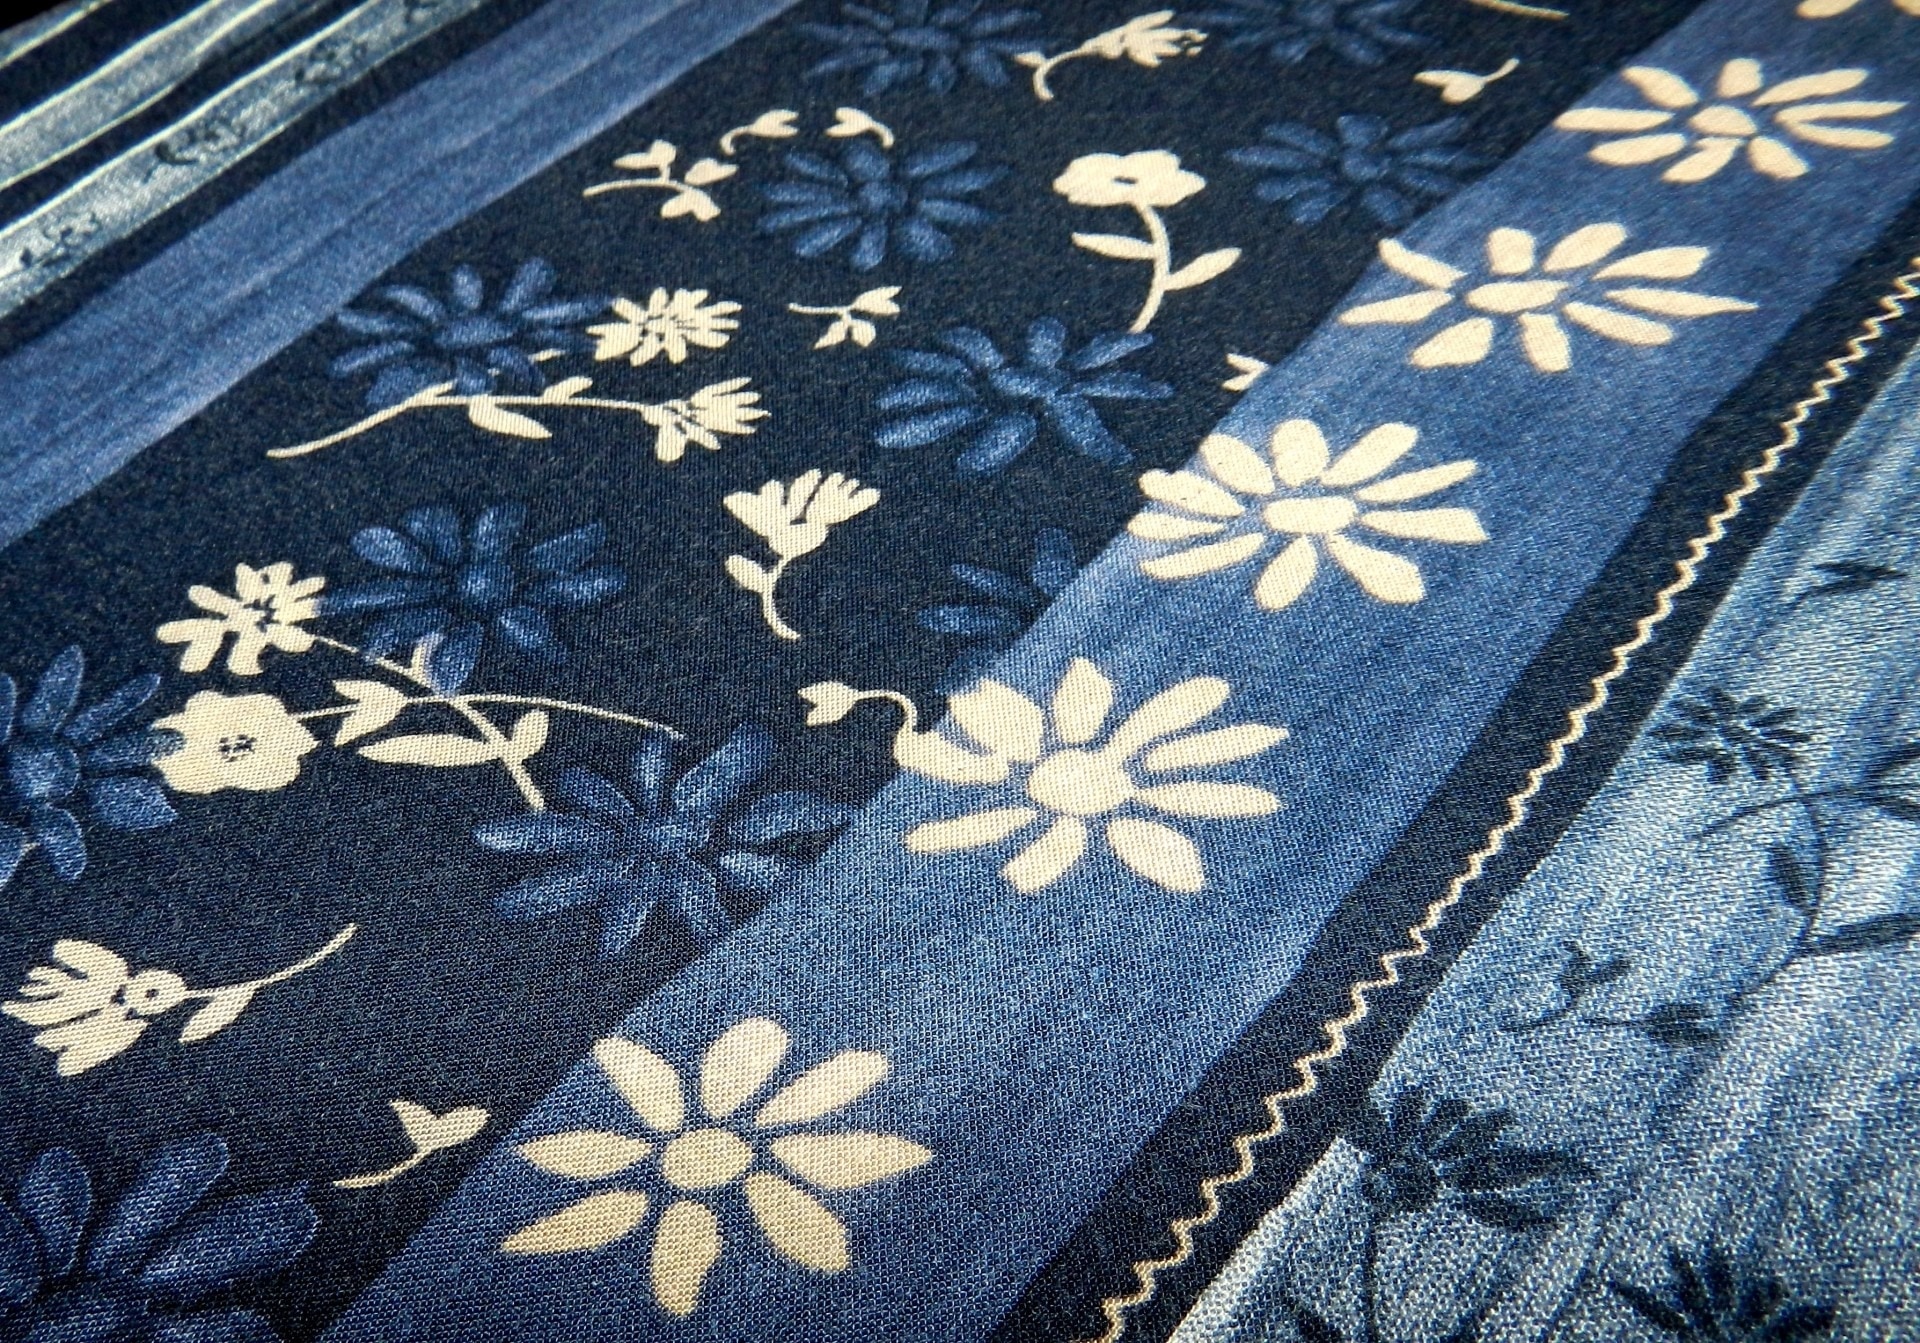 white black and blue floral textile